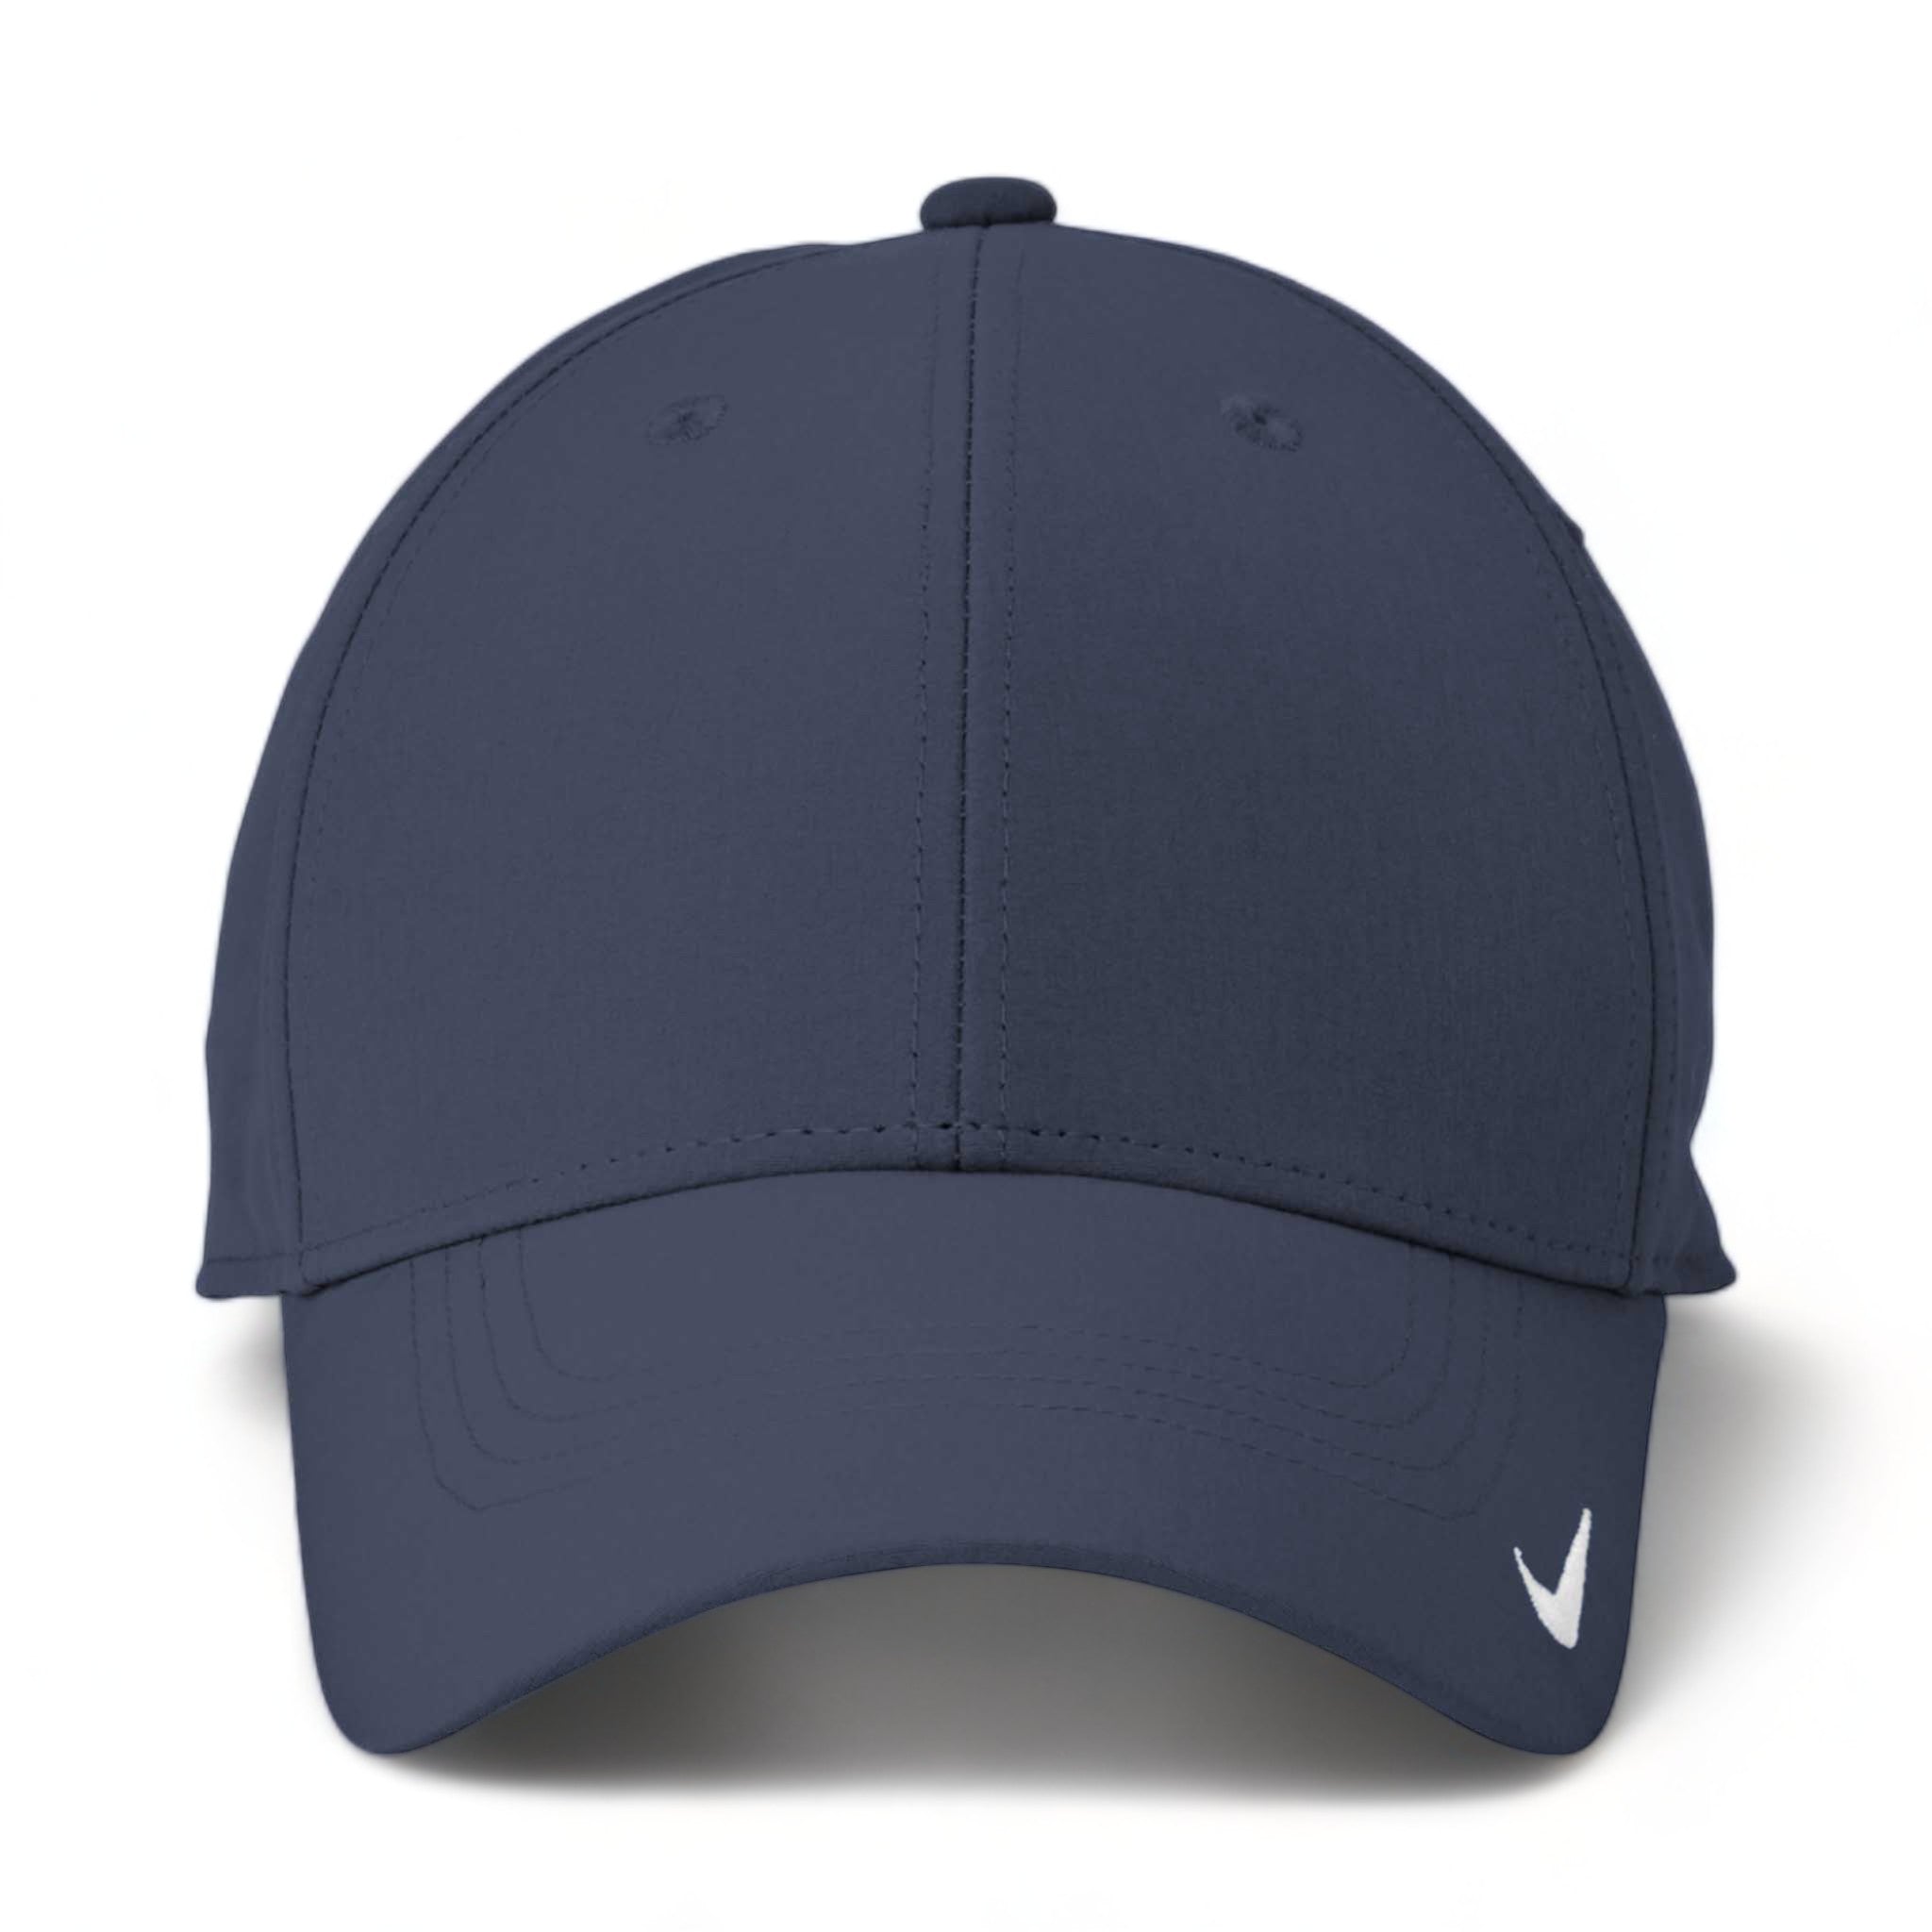 Front view of Nike NKFB6447 custom hat in navy